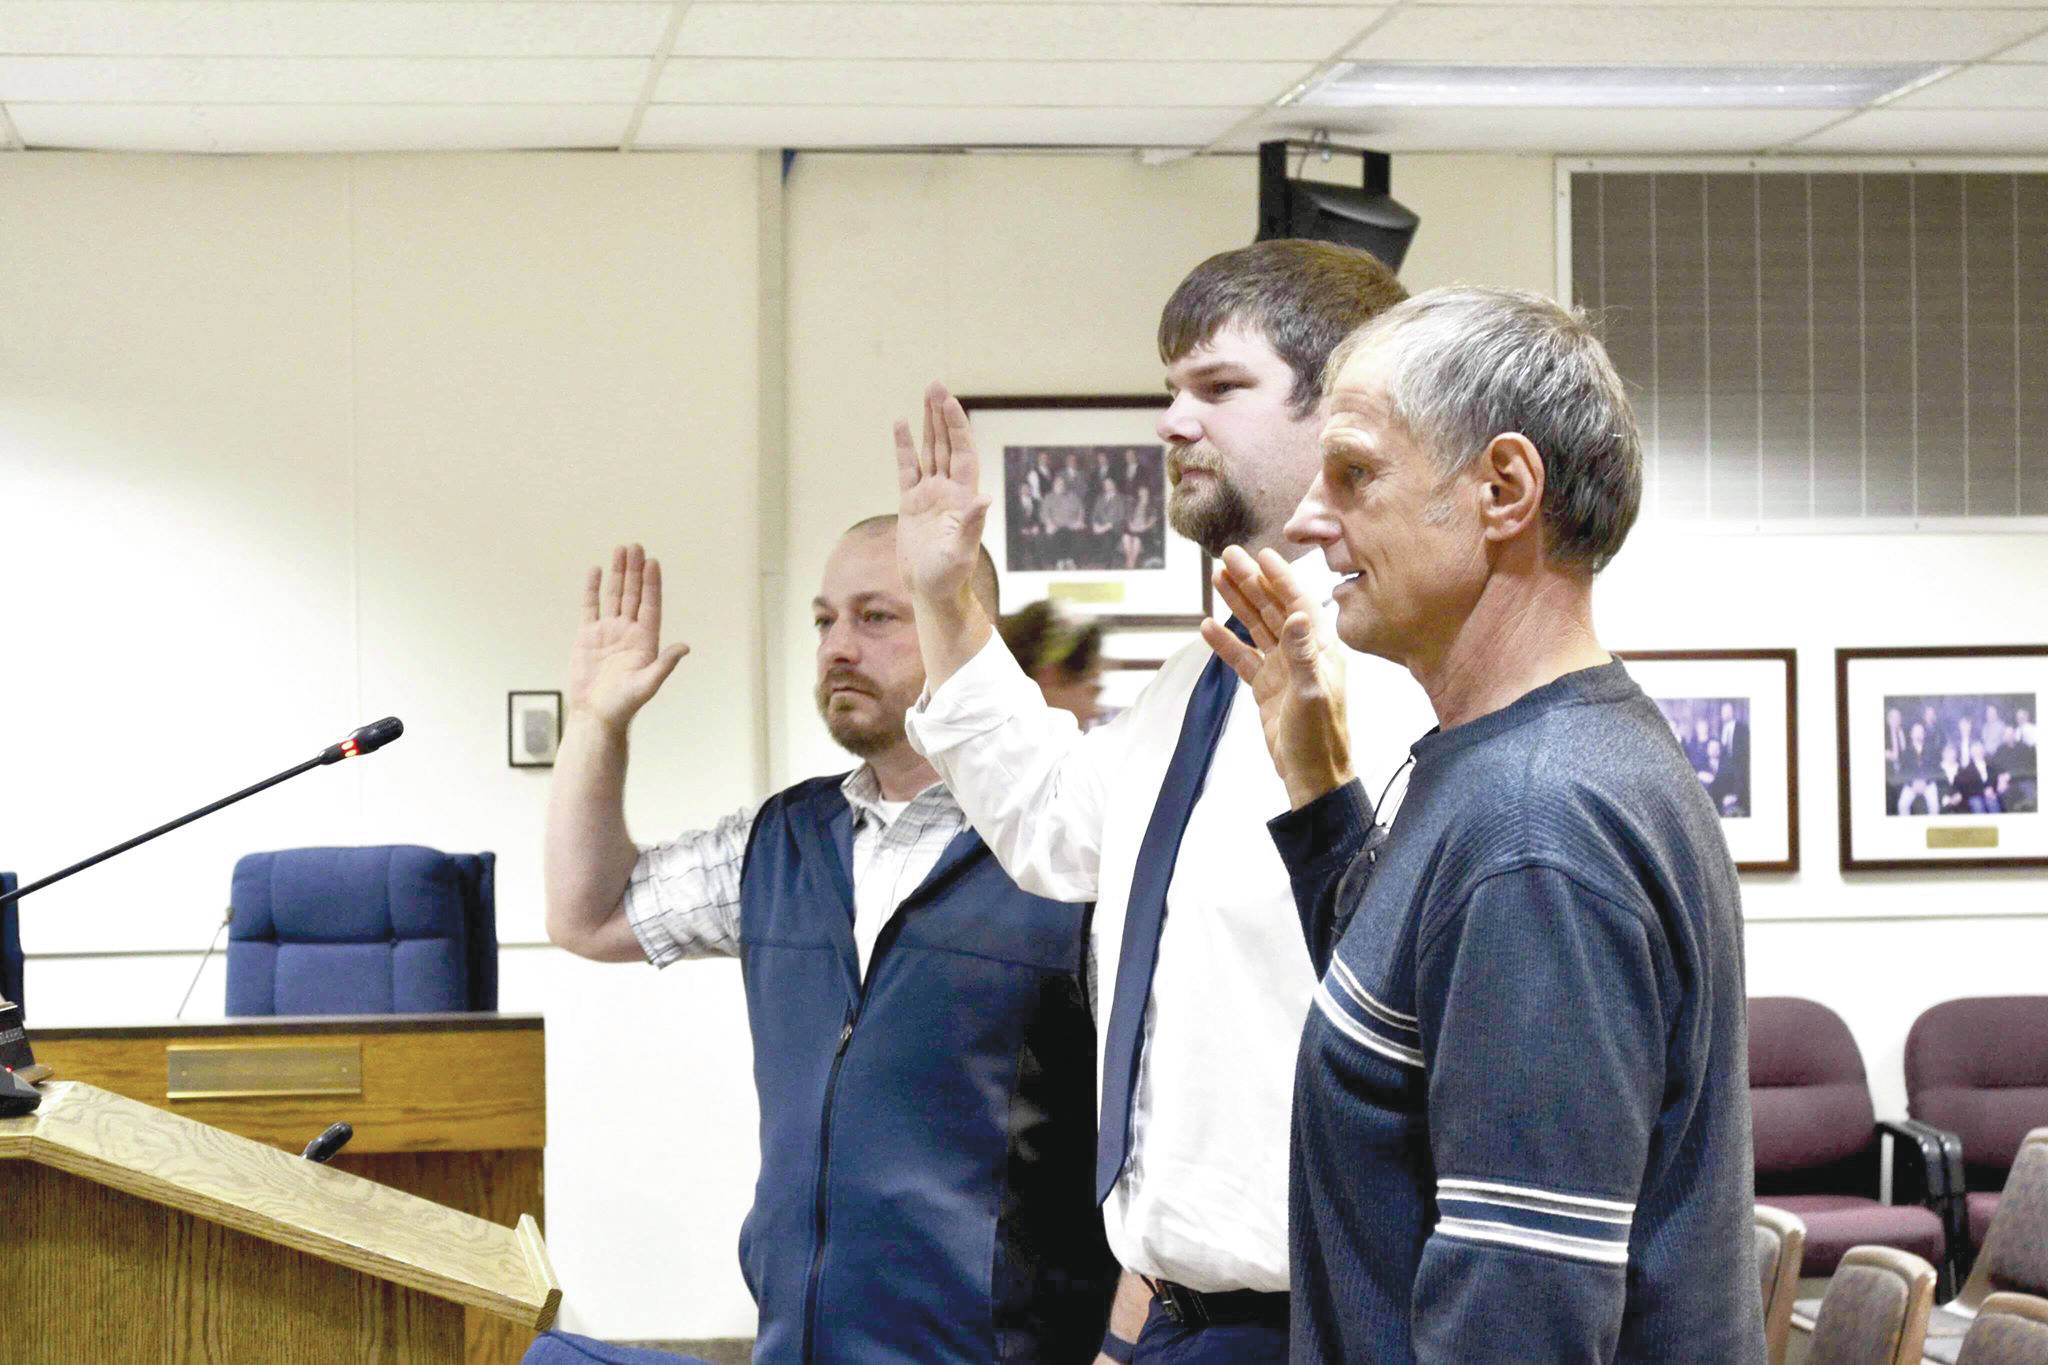 Newly elected assembly members Tyson Cox (left), Jesse Bjorkman (center) and Brent Johnson are sworn in during Tuesday’s Kenai Peninsula Borough Assembly meeting, Tuesday, Oct. 8, 2019, in Soldotna, Alaska. (Photo by Victoria Petersen/Peninsula Clarion)